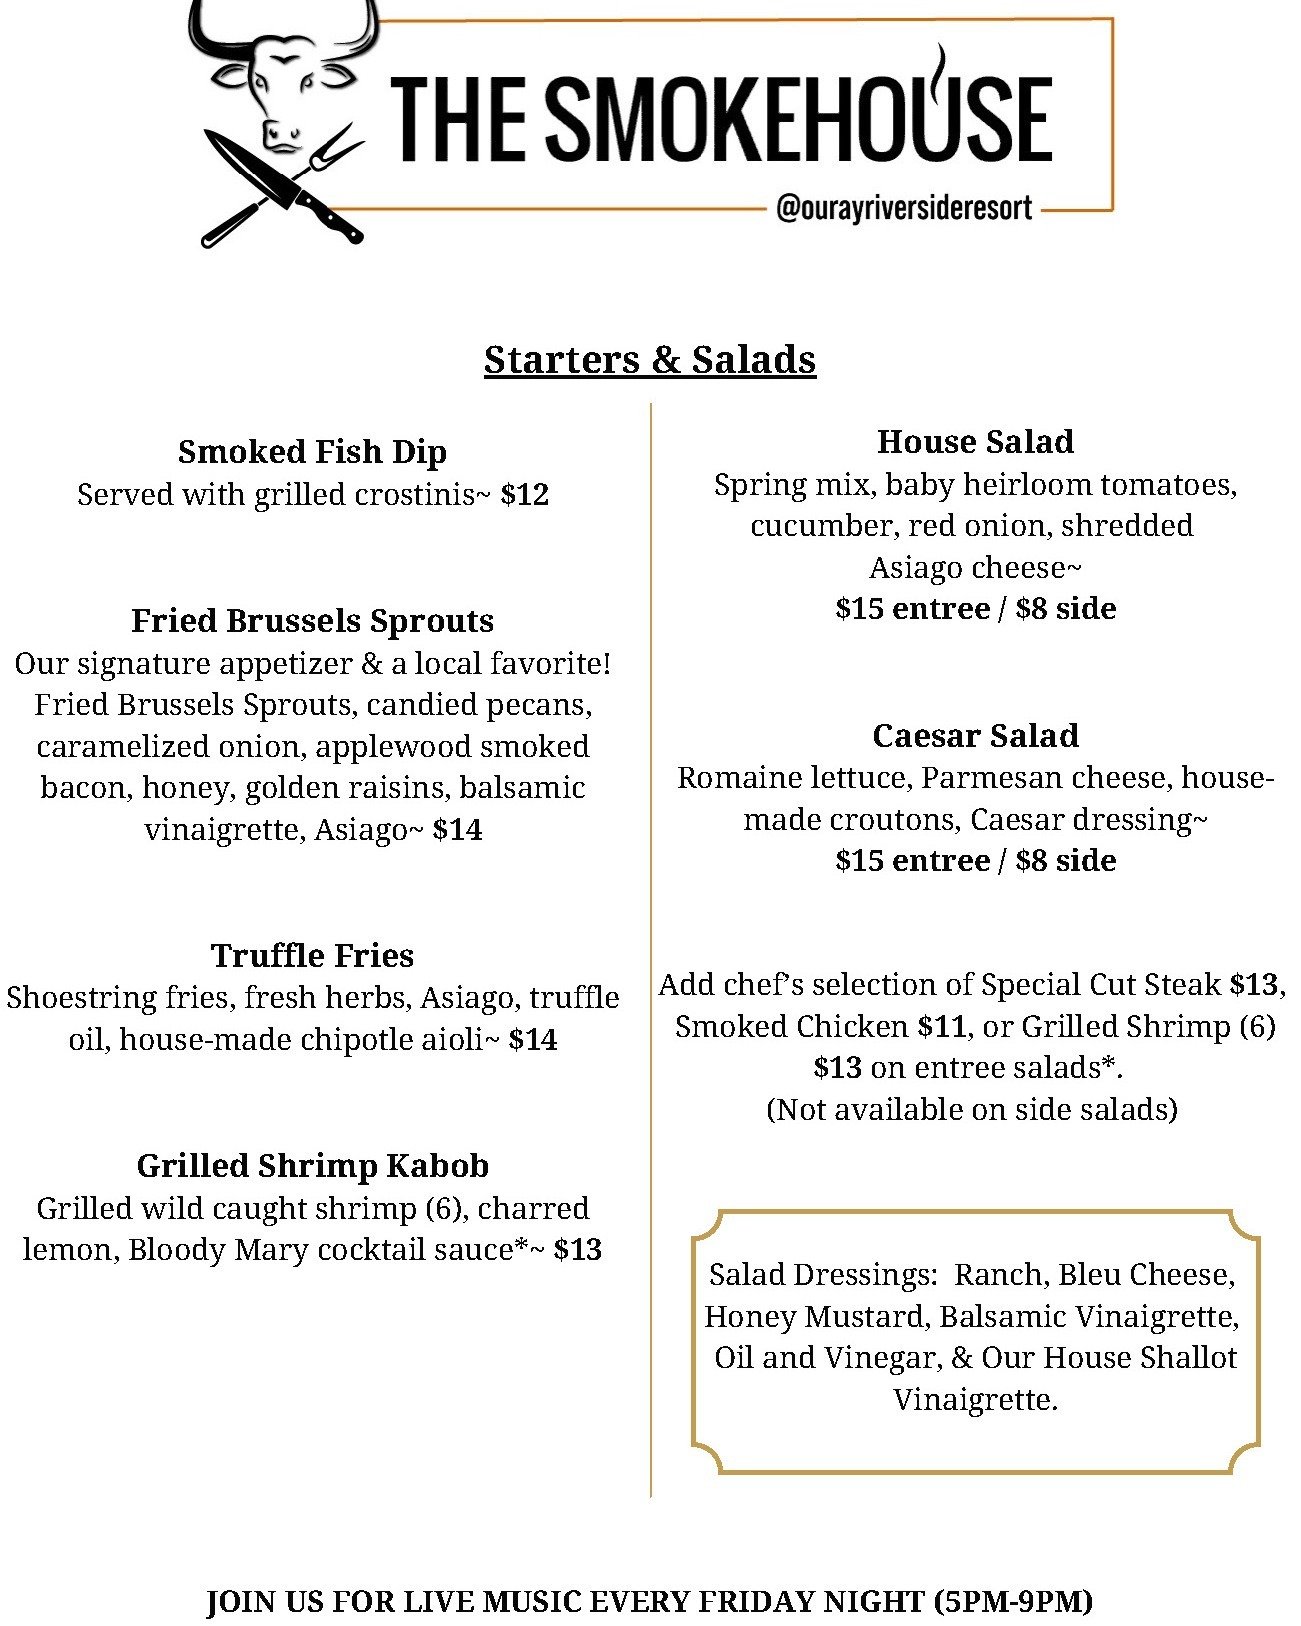 Join Chef Rene this weekend for our expanded summer hours and new menu!  Our Smokehouse is open Thursday-Sundays starting at 5 pm each day. 

#ouray #ouraycolorado #bbq #smokehouse